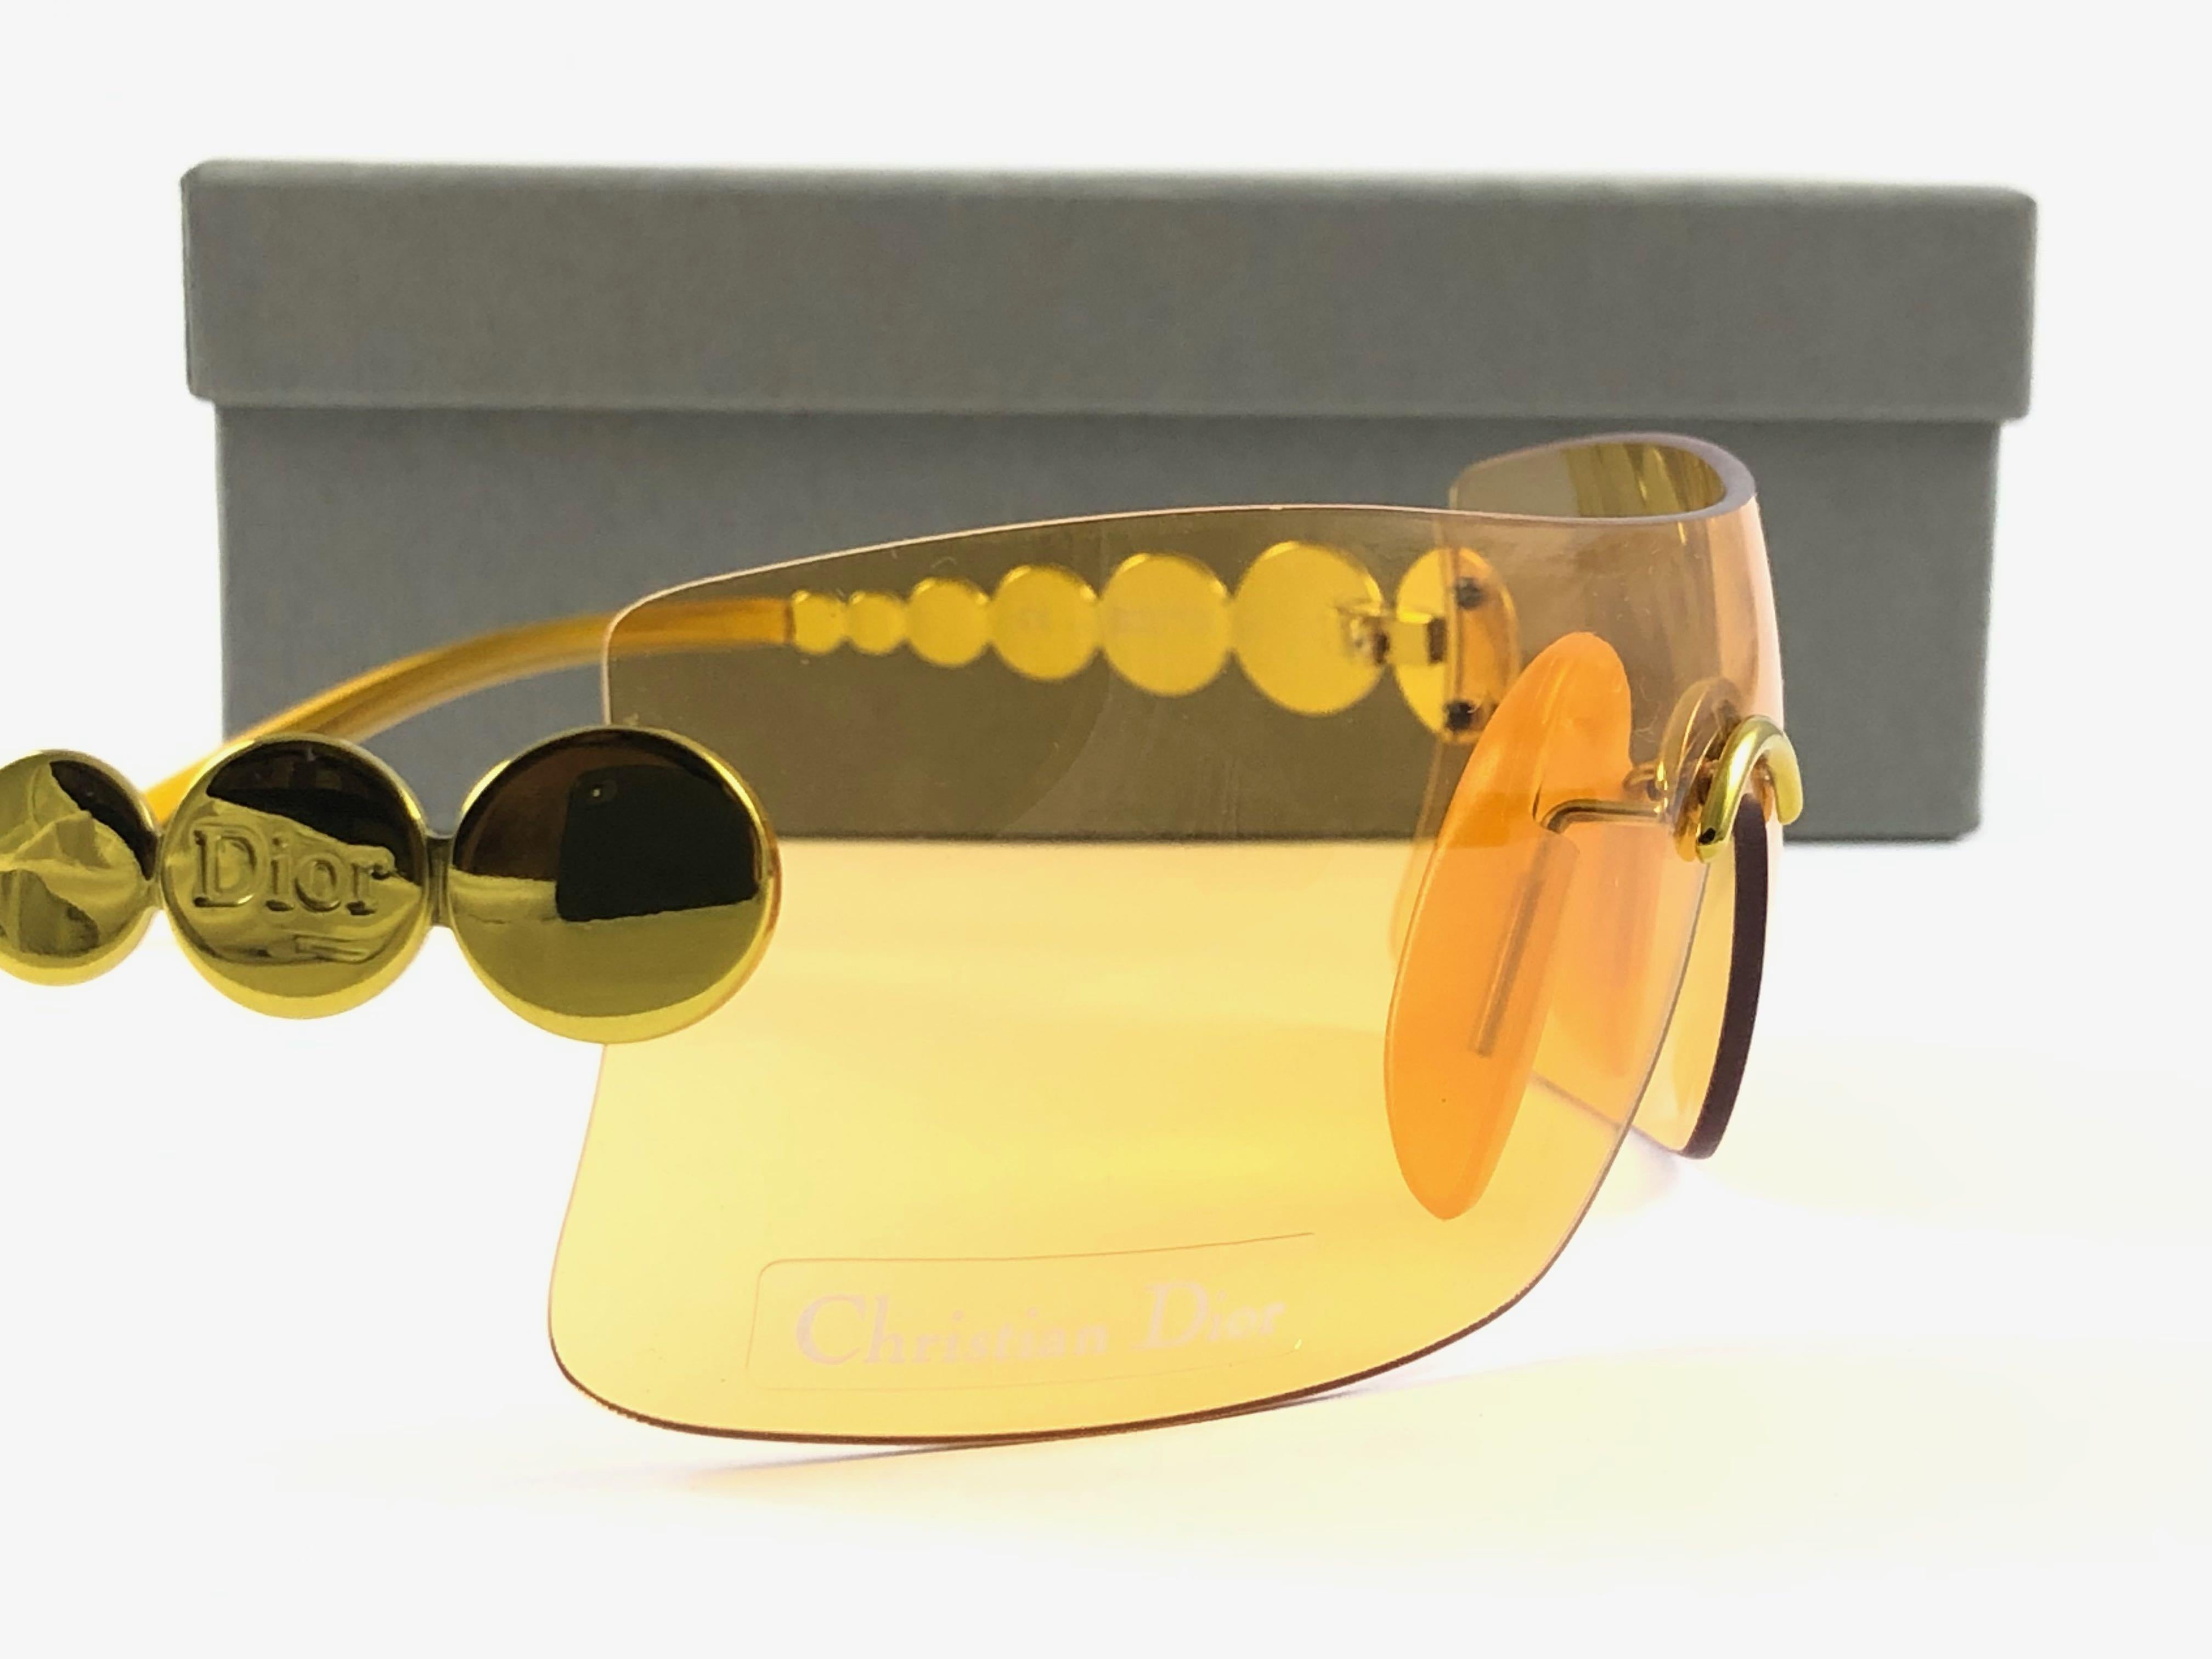 Vintage Christian Dior Millenium Amber Gold Bubble Wrap Sunglasses Fall 2000 by Galliano.

Made in Austria.
 
This piece show minor sign of wear due to  storage.

Front : 16.5 cms

Lens Height : 4.5 cms

Lens Width : 16.5 cms 